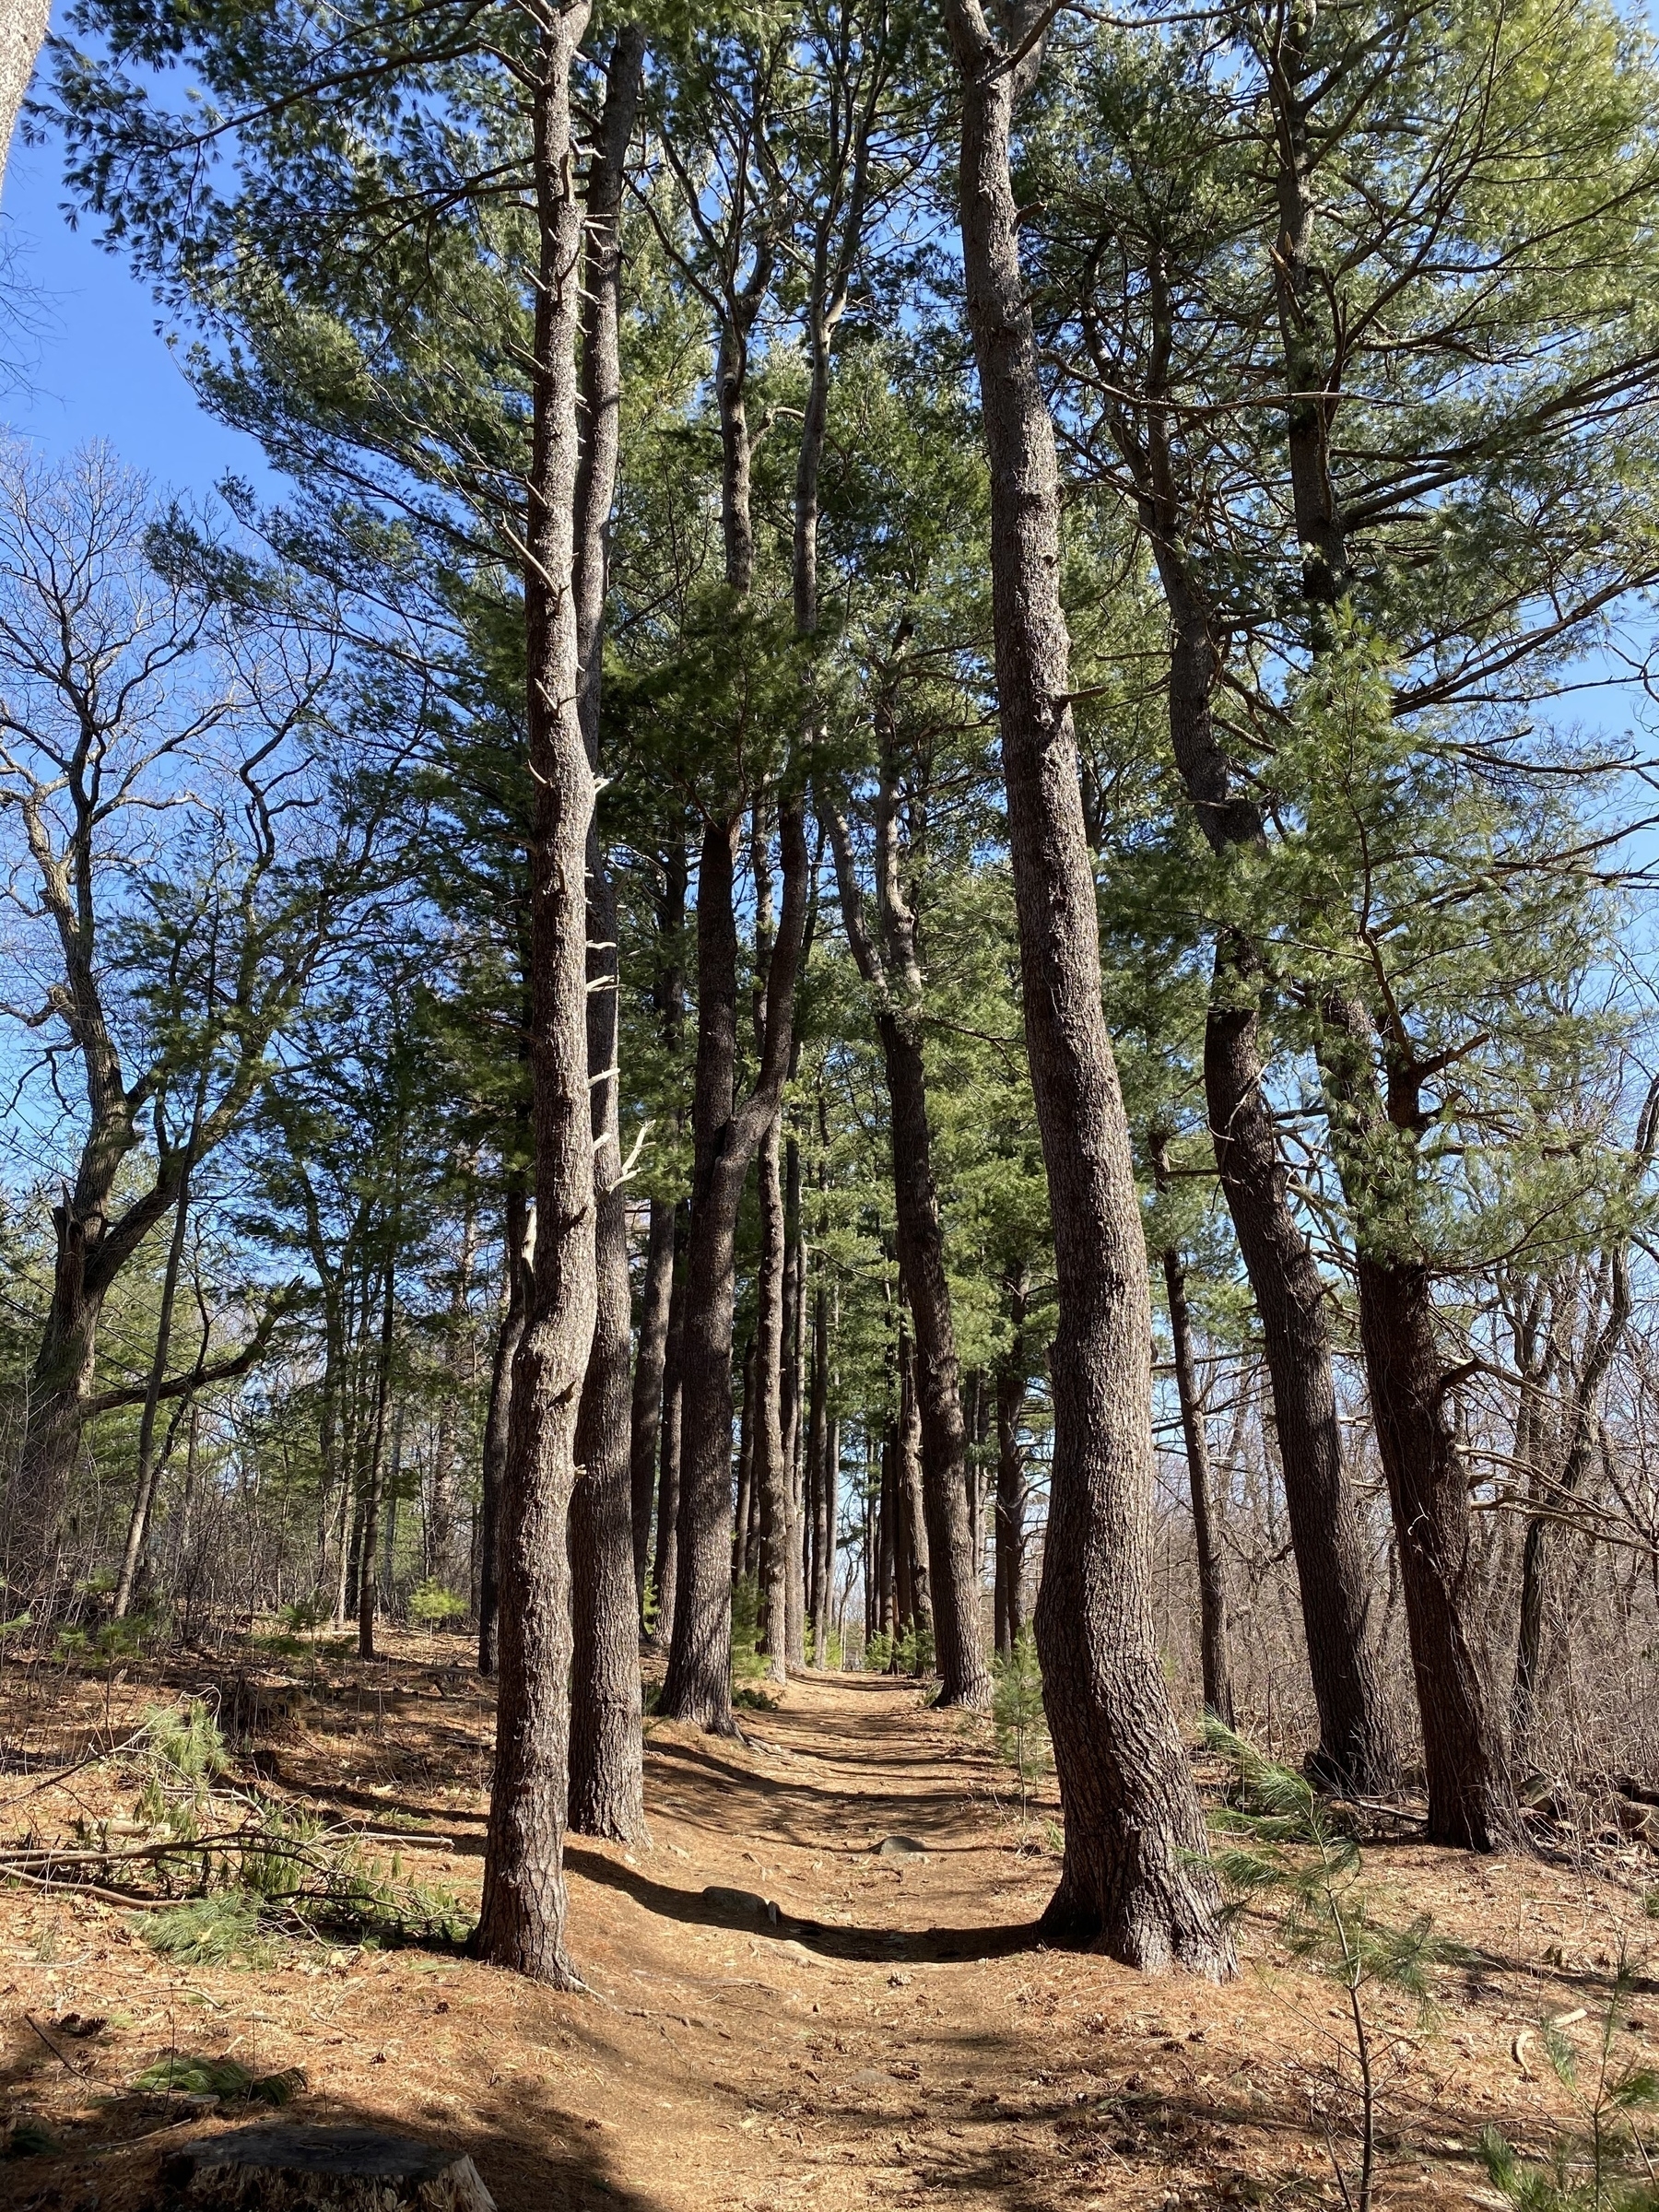 A dirt path leading between two rows of pine trees.